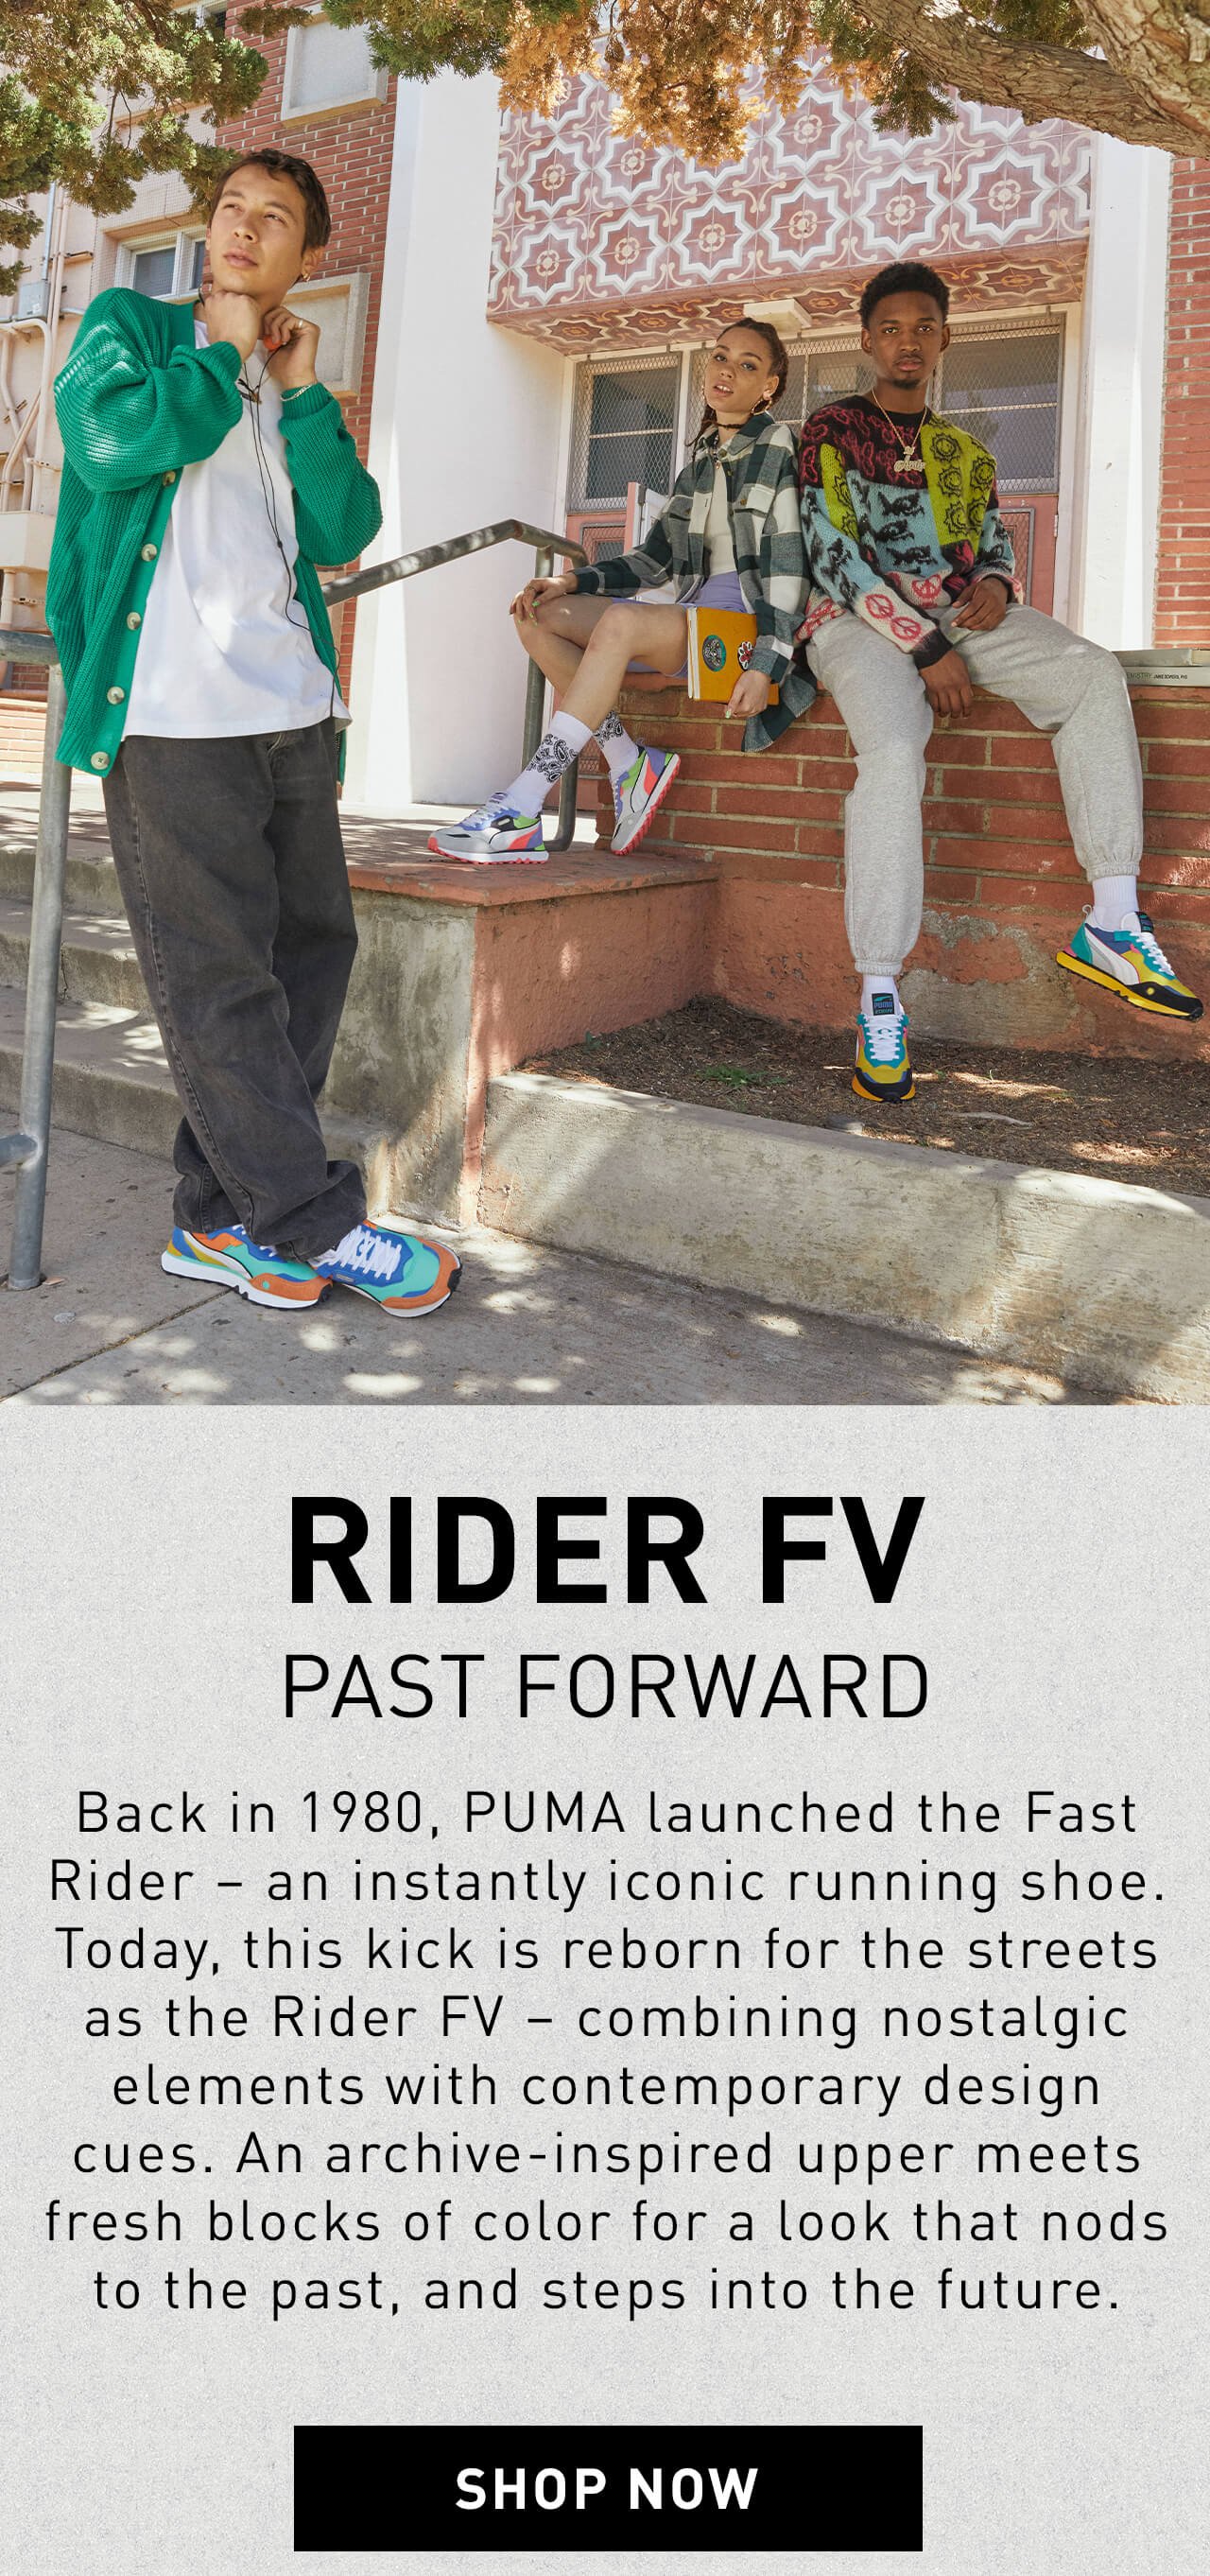 RIDER FV | PAST FORWARD | Back in 1980, PUMA launched the Fast Rider – an instantly iconic running shoe. Today, this kick is reborn for the streets as the Rider FV – combining nostalgic elements with contemporary design cues. An archive-inspired upper meets fresh blocks of color for a look that nods to the past, and steps into the future. | SHOP NOW